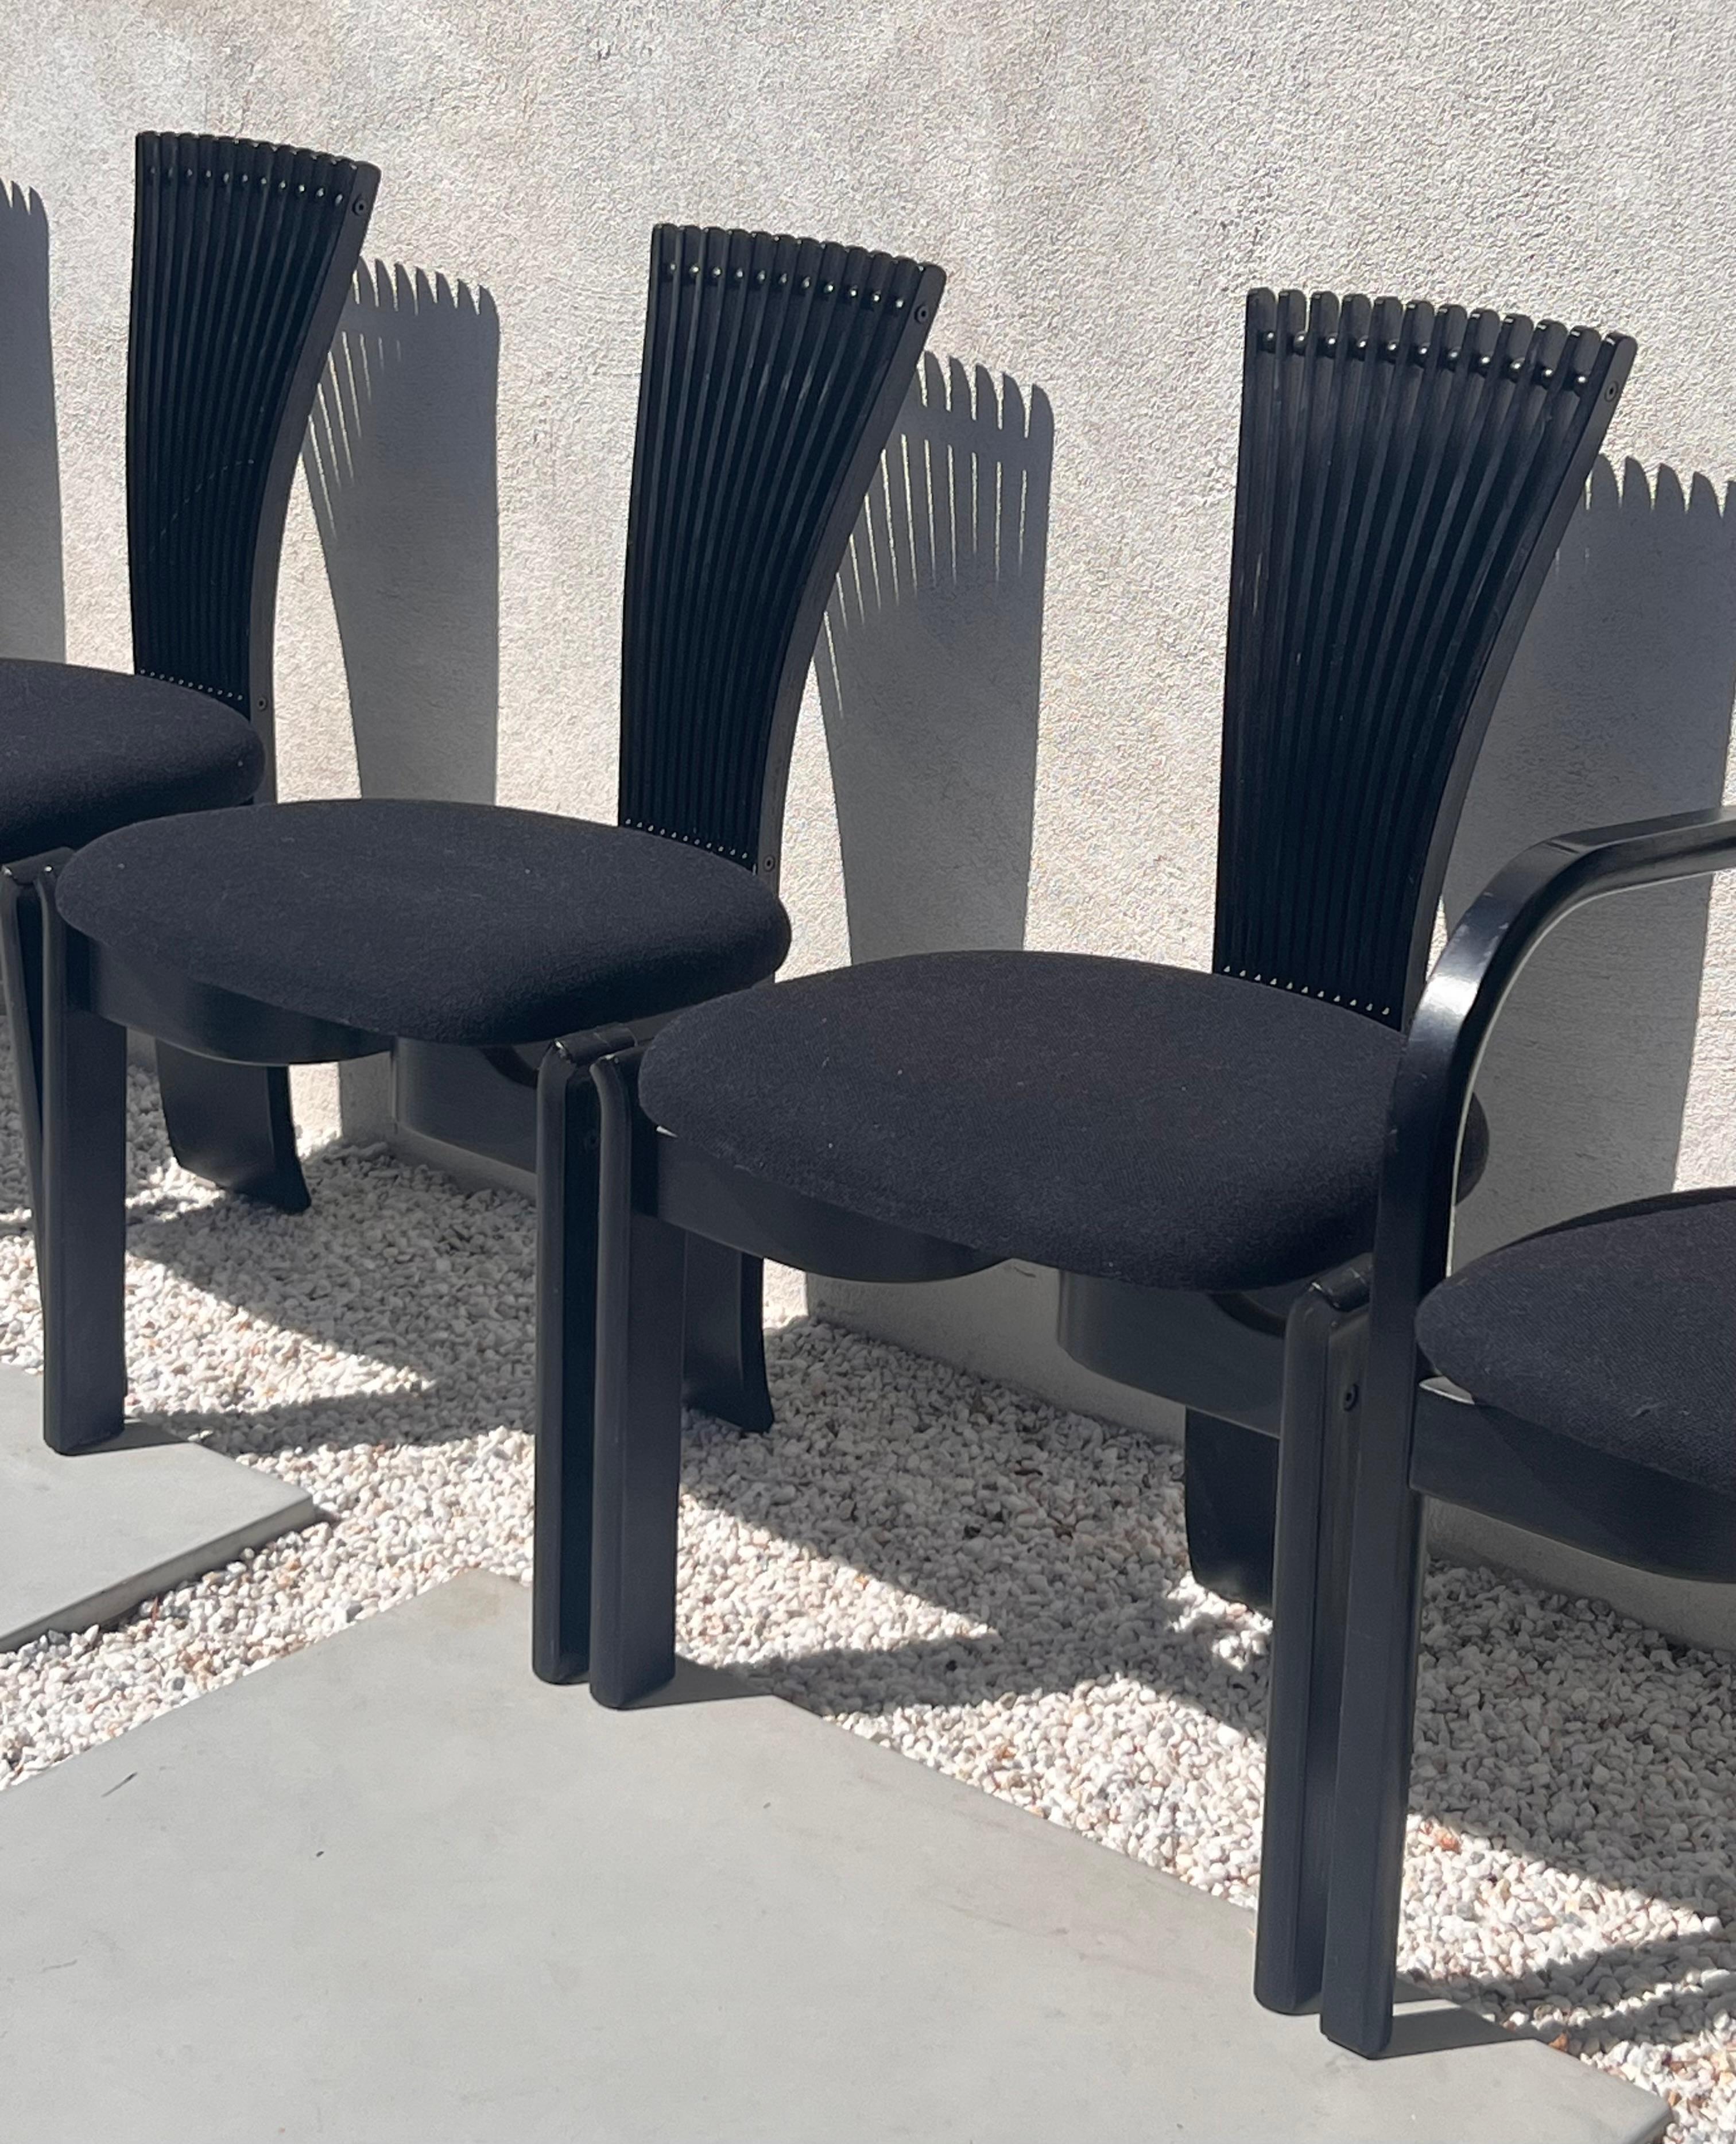 A set of 6 Danish modern «Totem» dining chairs by Torstein Nilsen for Westnofa, early 1970s. Postmodern sculptural forms, showcasing the fanned backs with the classic sphere motif, render these chairs utterly unique and a statement for any interior